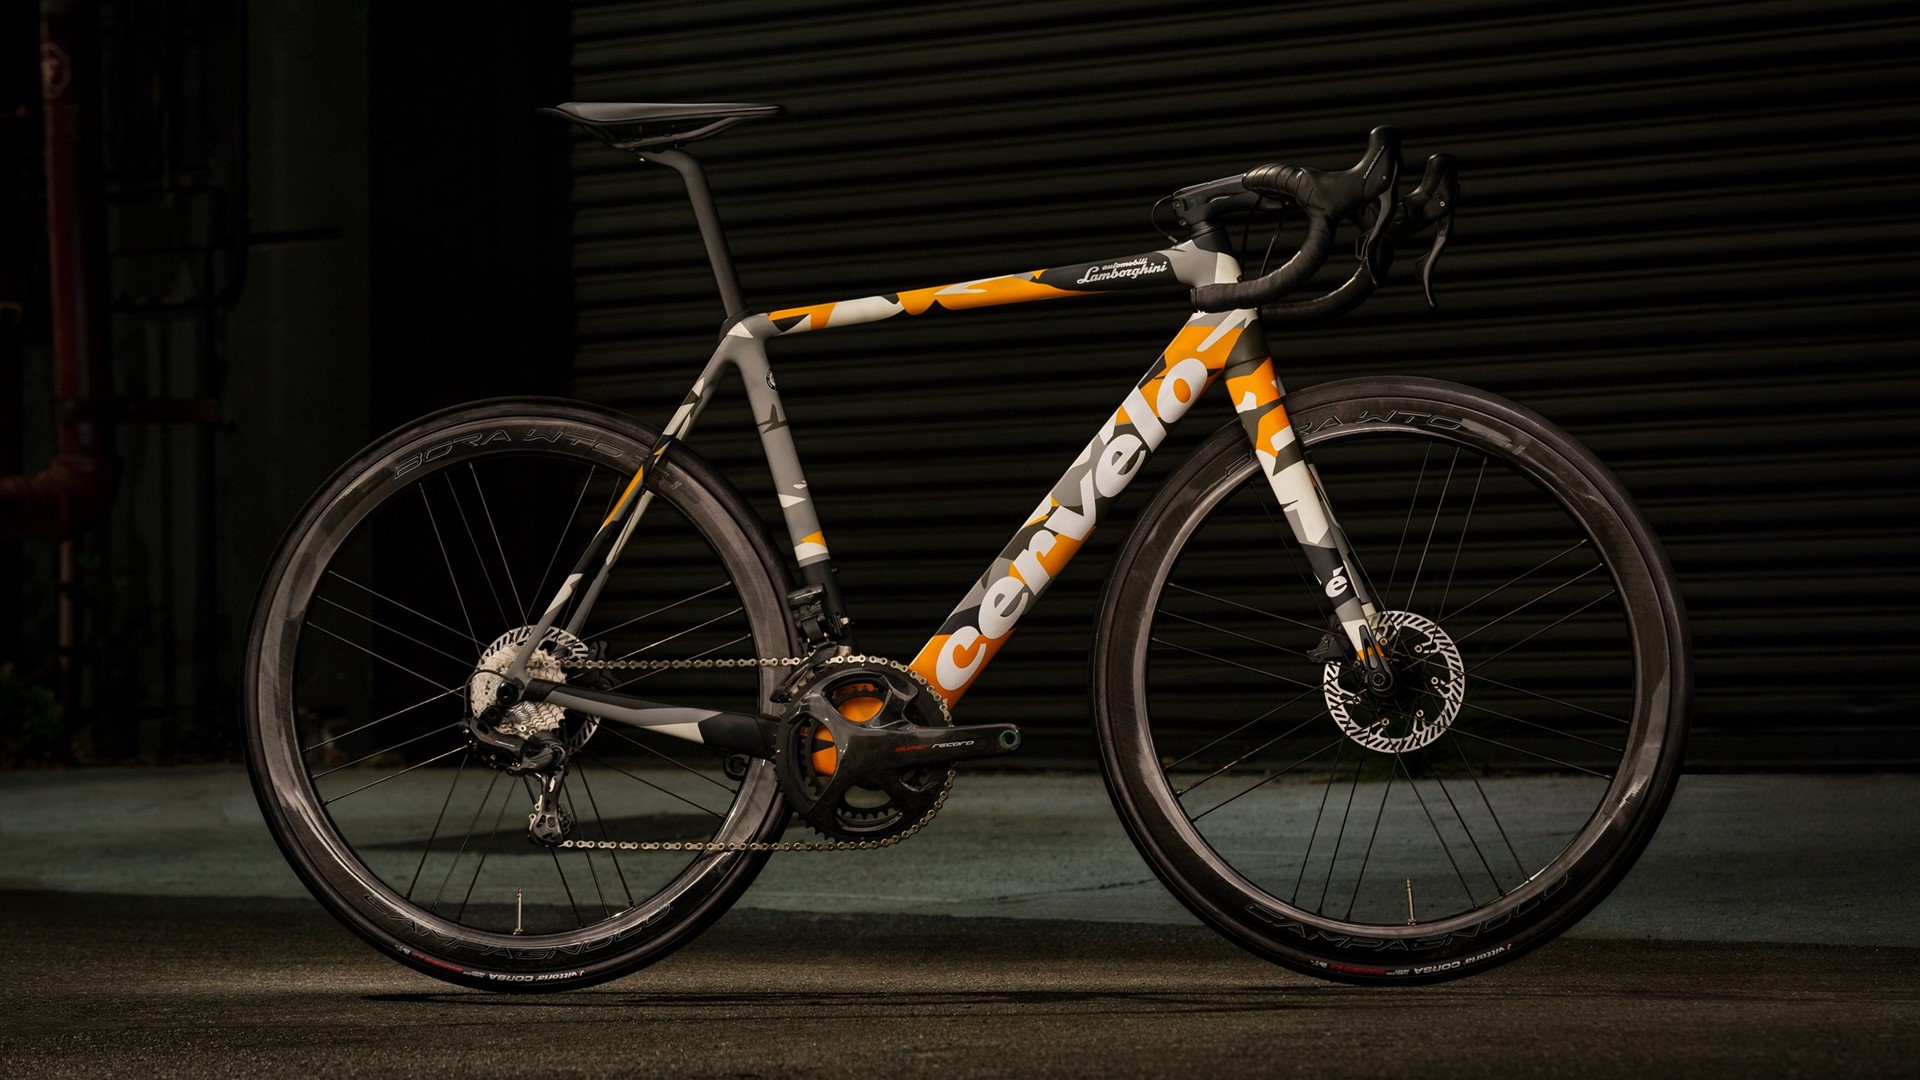 Automobili Lamborghini And Cervelo Present The New R5 Bicycle In A Limited Edition